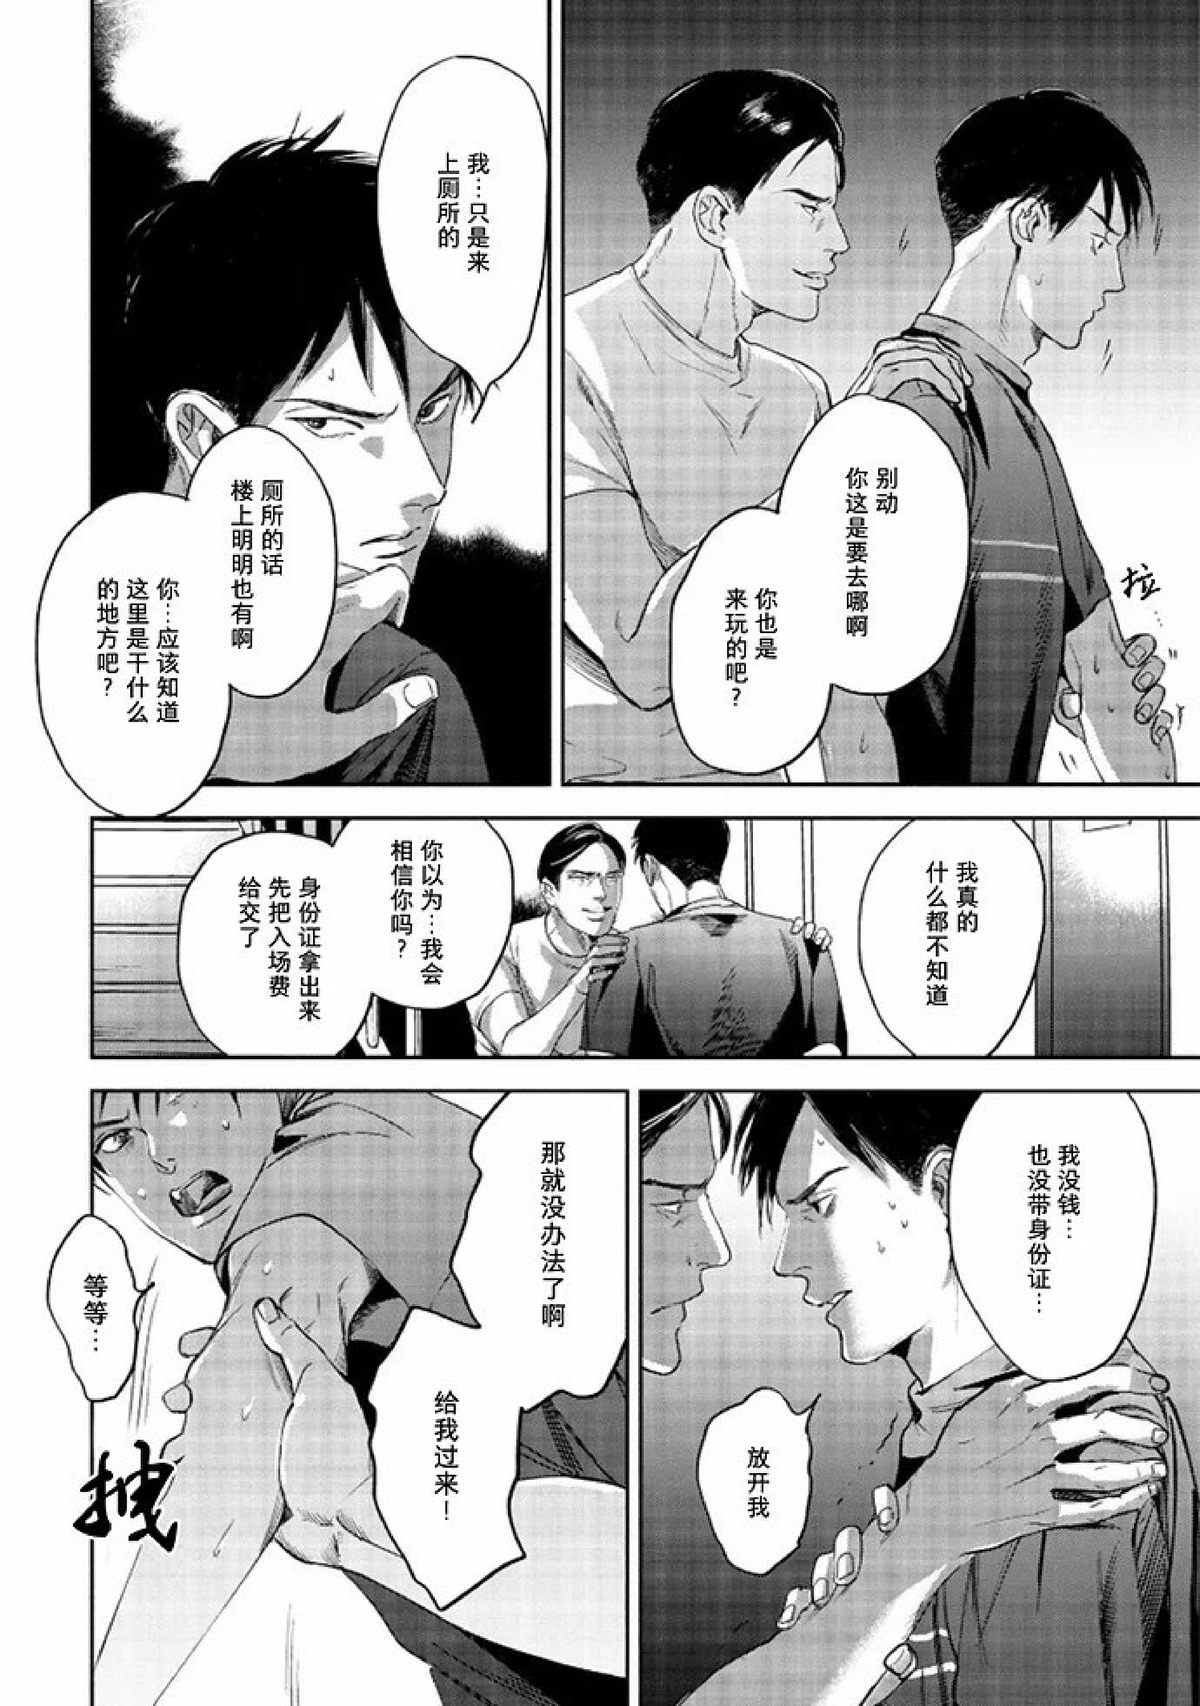 【Two sides of the same coin[腐漫]】漫画-（上卷01-02）章节漫画下拉式图片-52.jpg